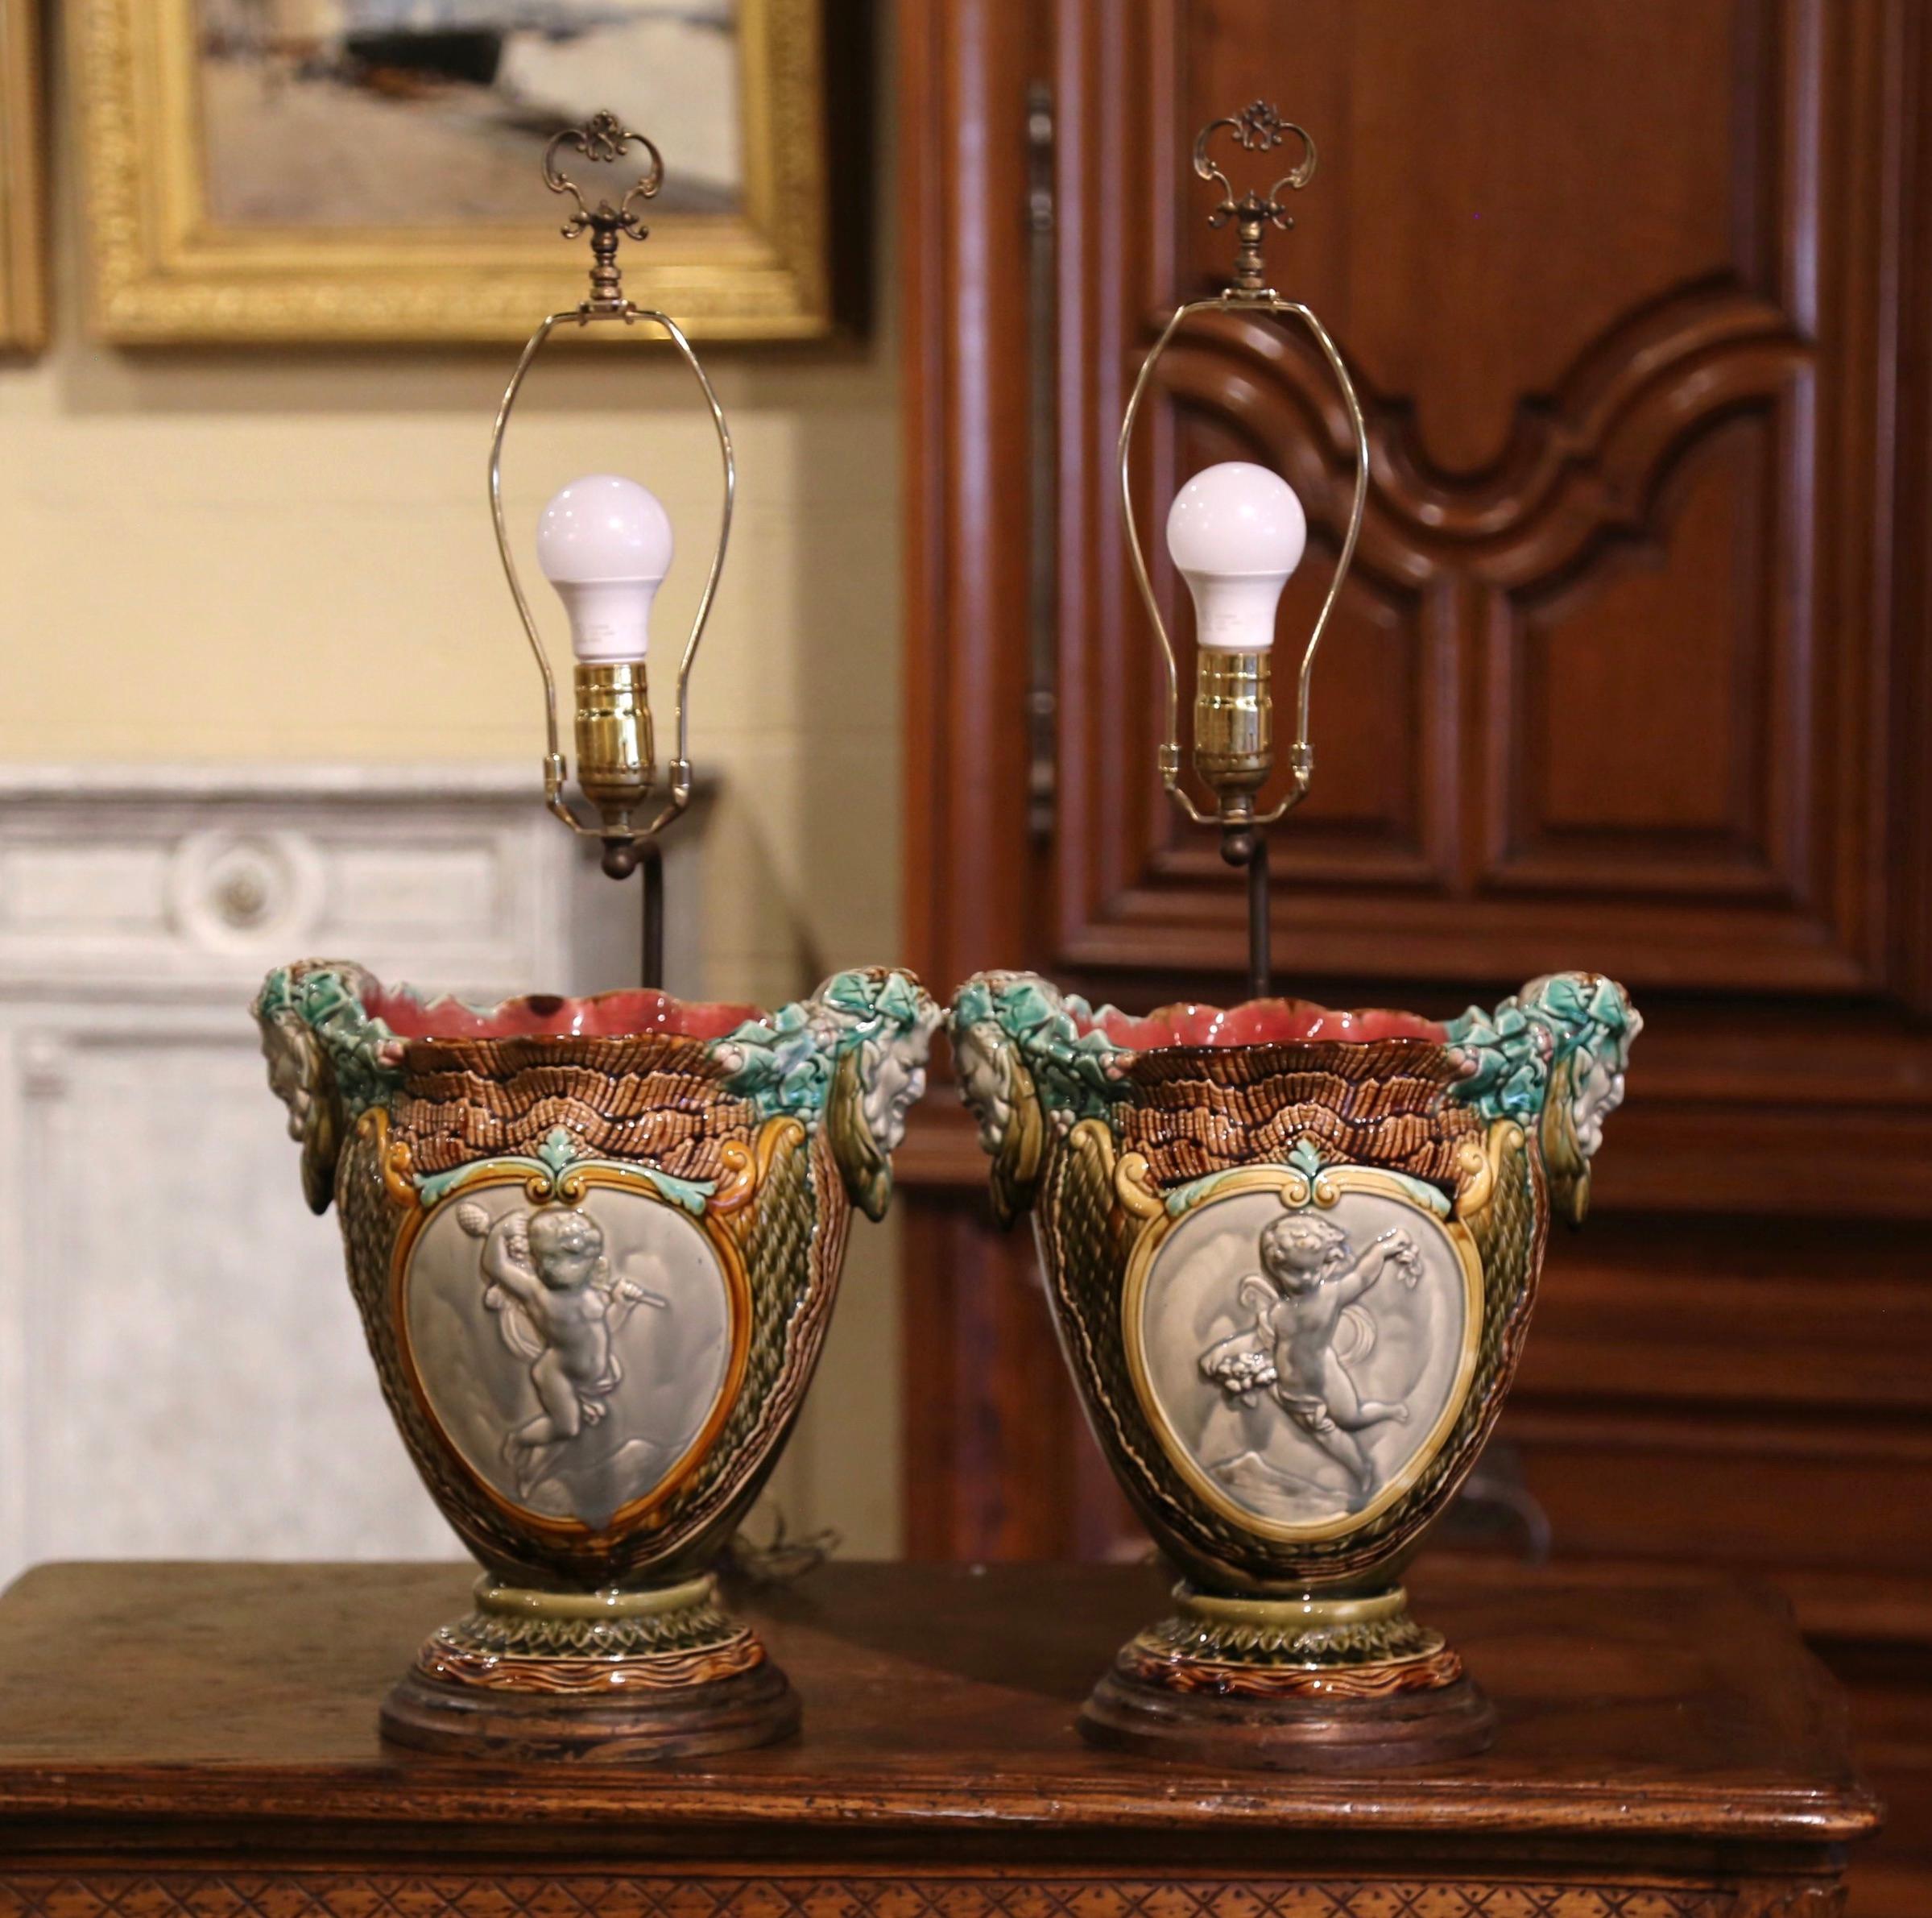 Bring a little Neoclassical French flair into your home with this colorful pair of vases converted into table lamps. Crafted in France, the handcrafted Majolica cachepots are dressed with Bacchus figure handles in high relief; they are further